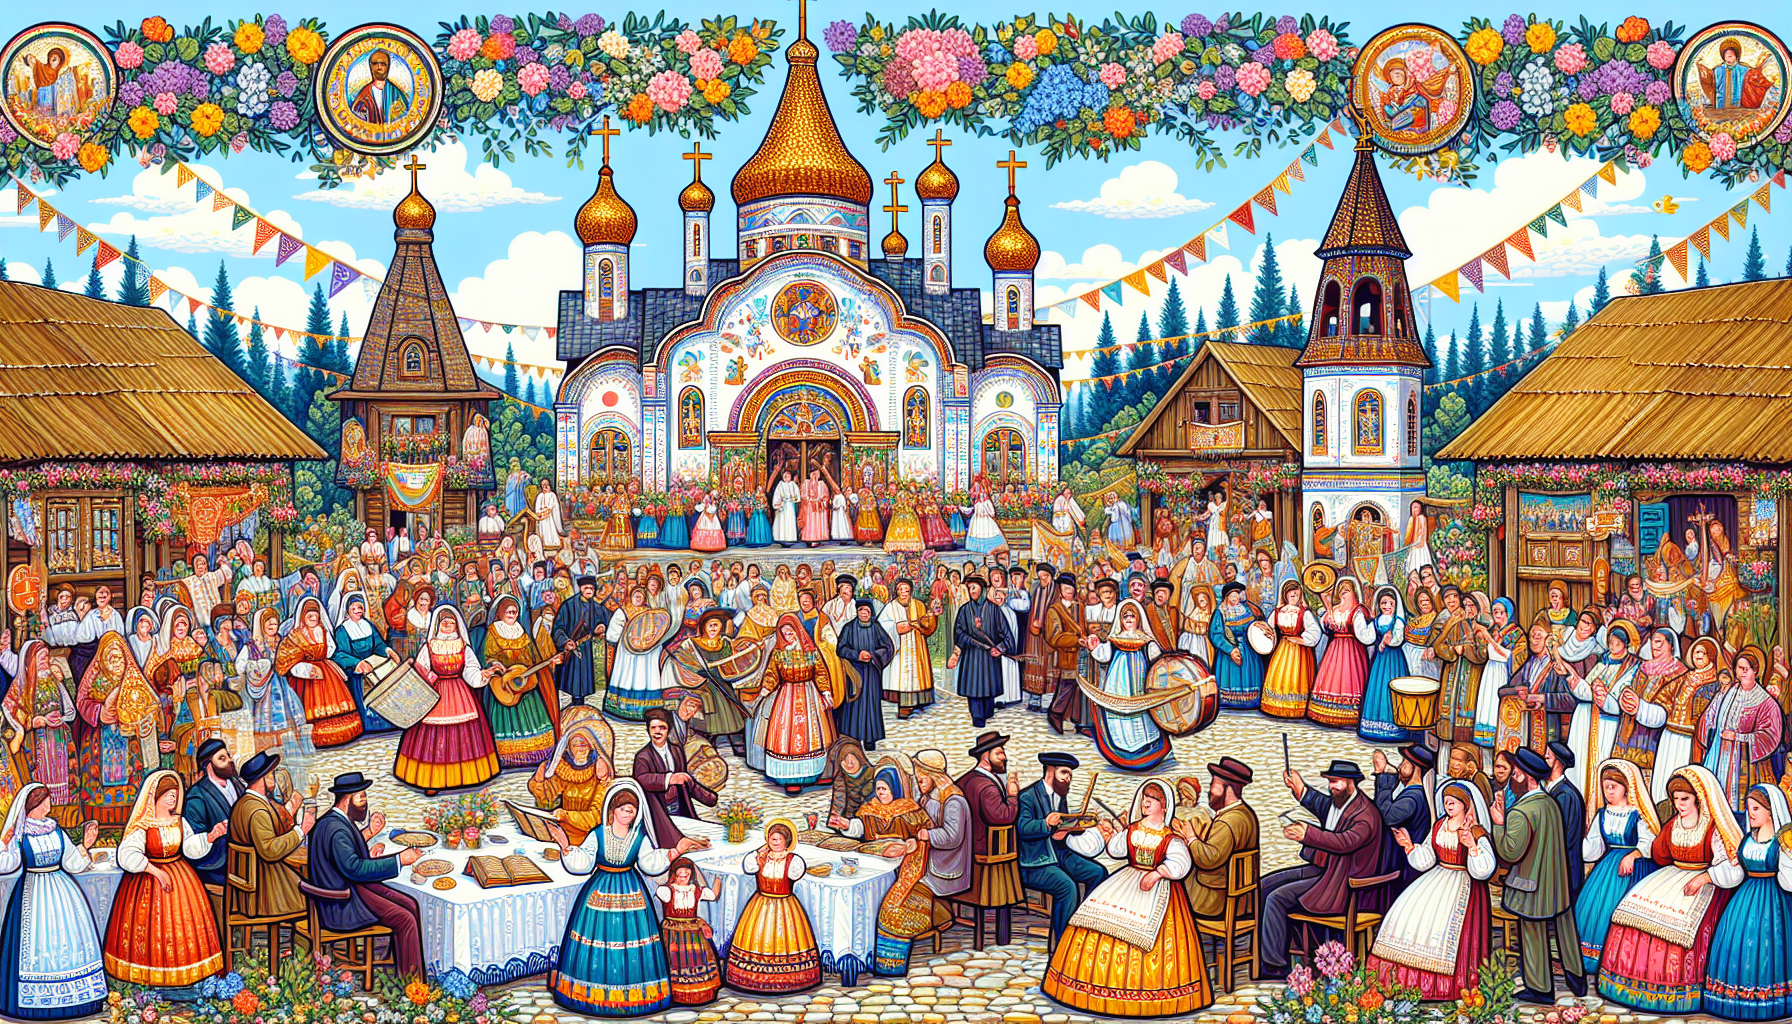 A traditional celebration honoring Saints Peter and Paul, featuring a lively outdoor festival in a charming rustic village with colorful banners, religious iconography, and joyful community members dr